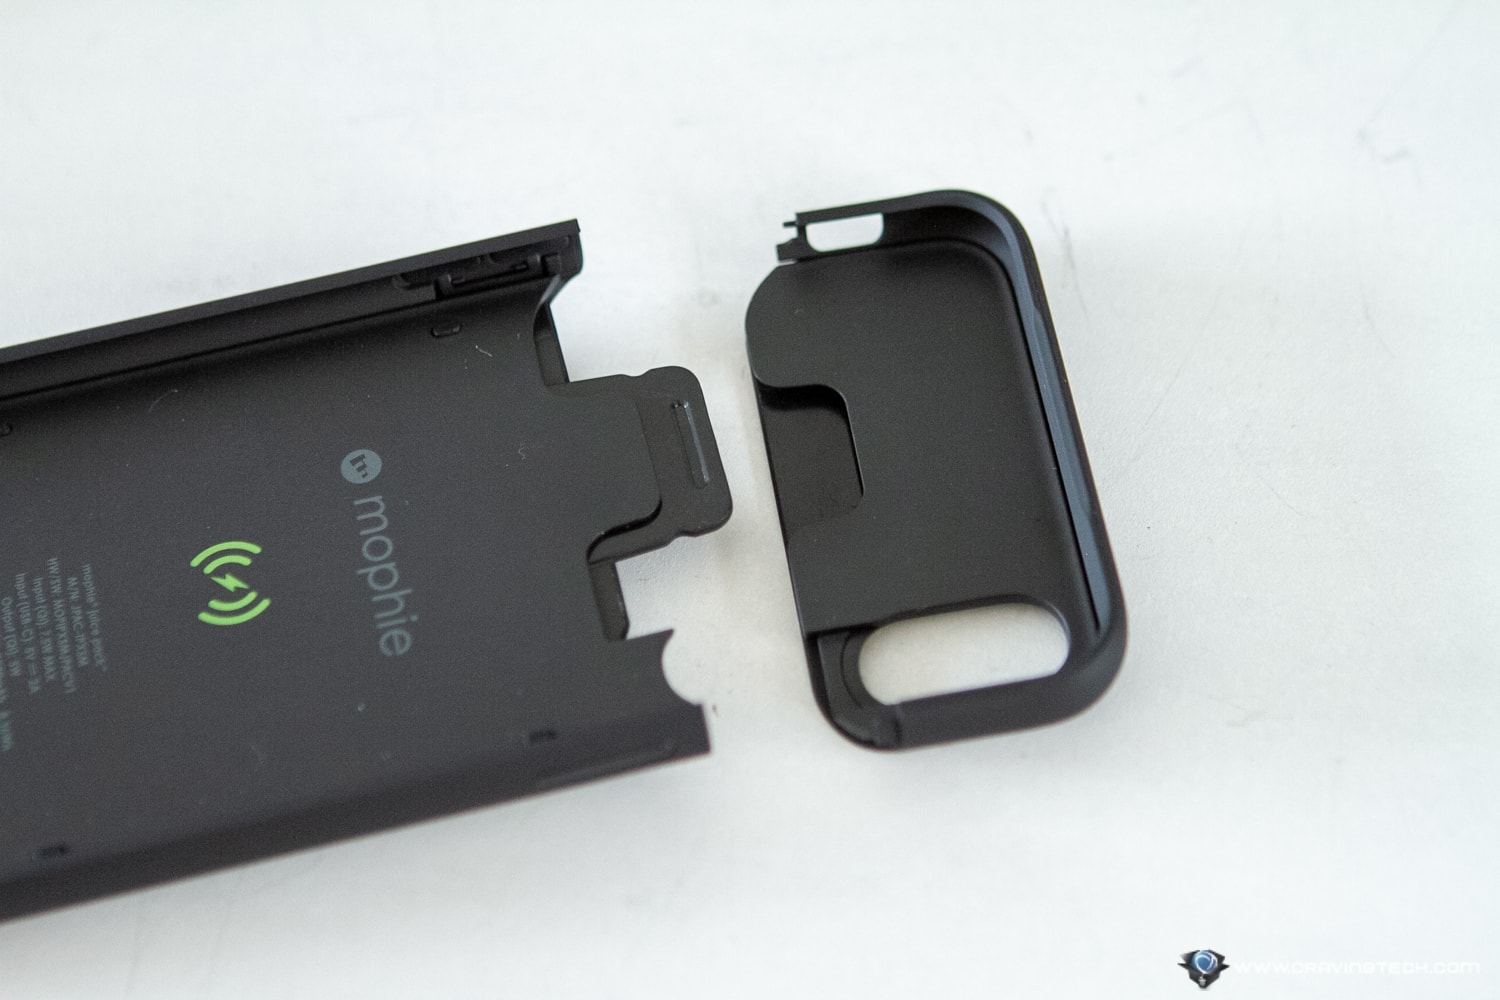 Mophie Juice Pack Access Review